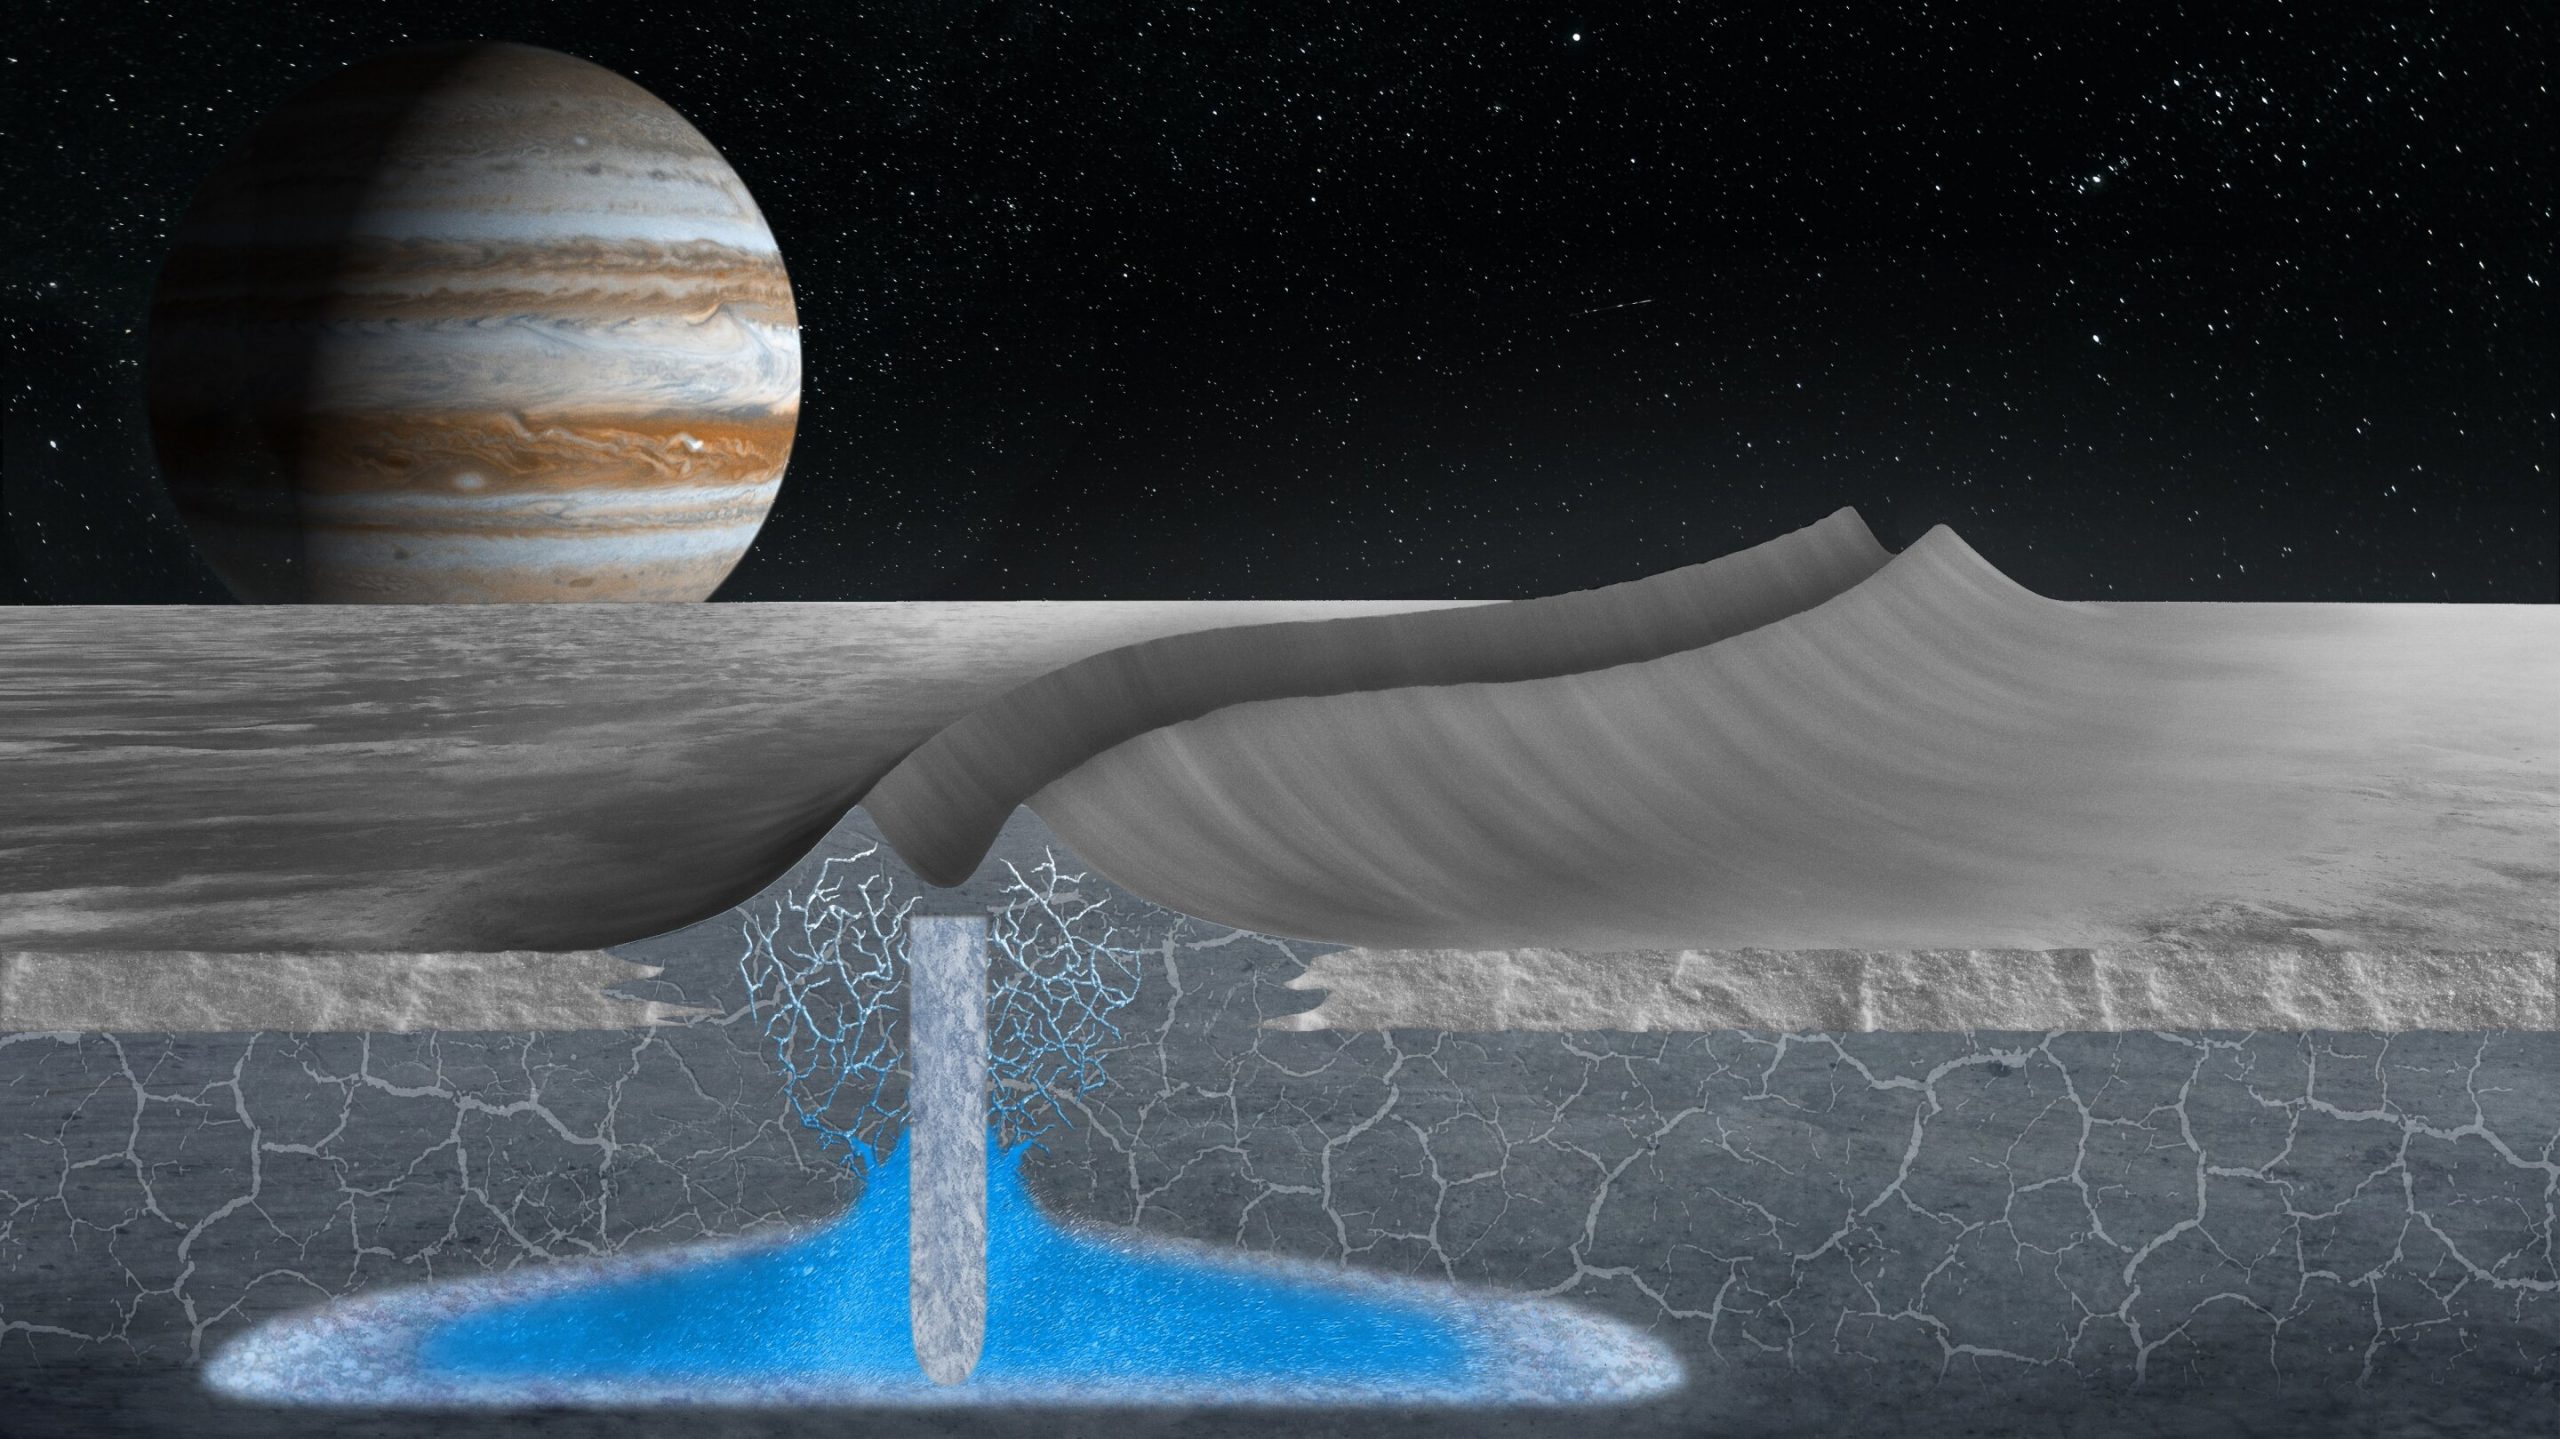 There could be water near the surface of Europa and it could be enough for alien organisms to survive. Credit: Justice Blaine Wainwright